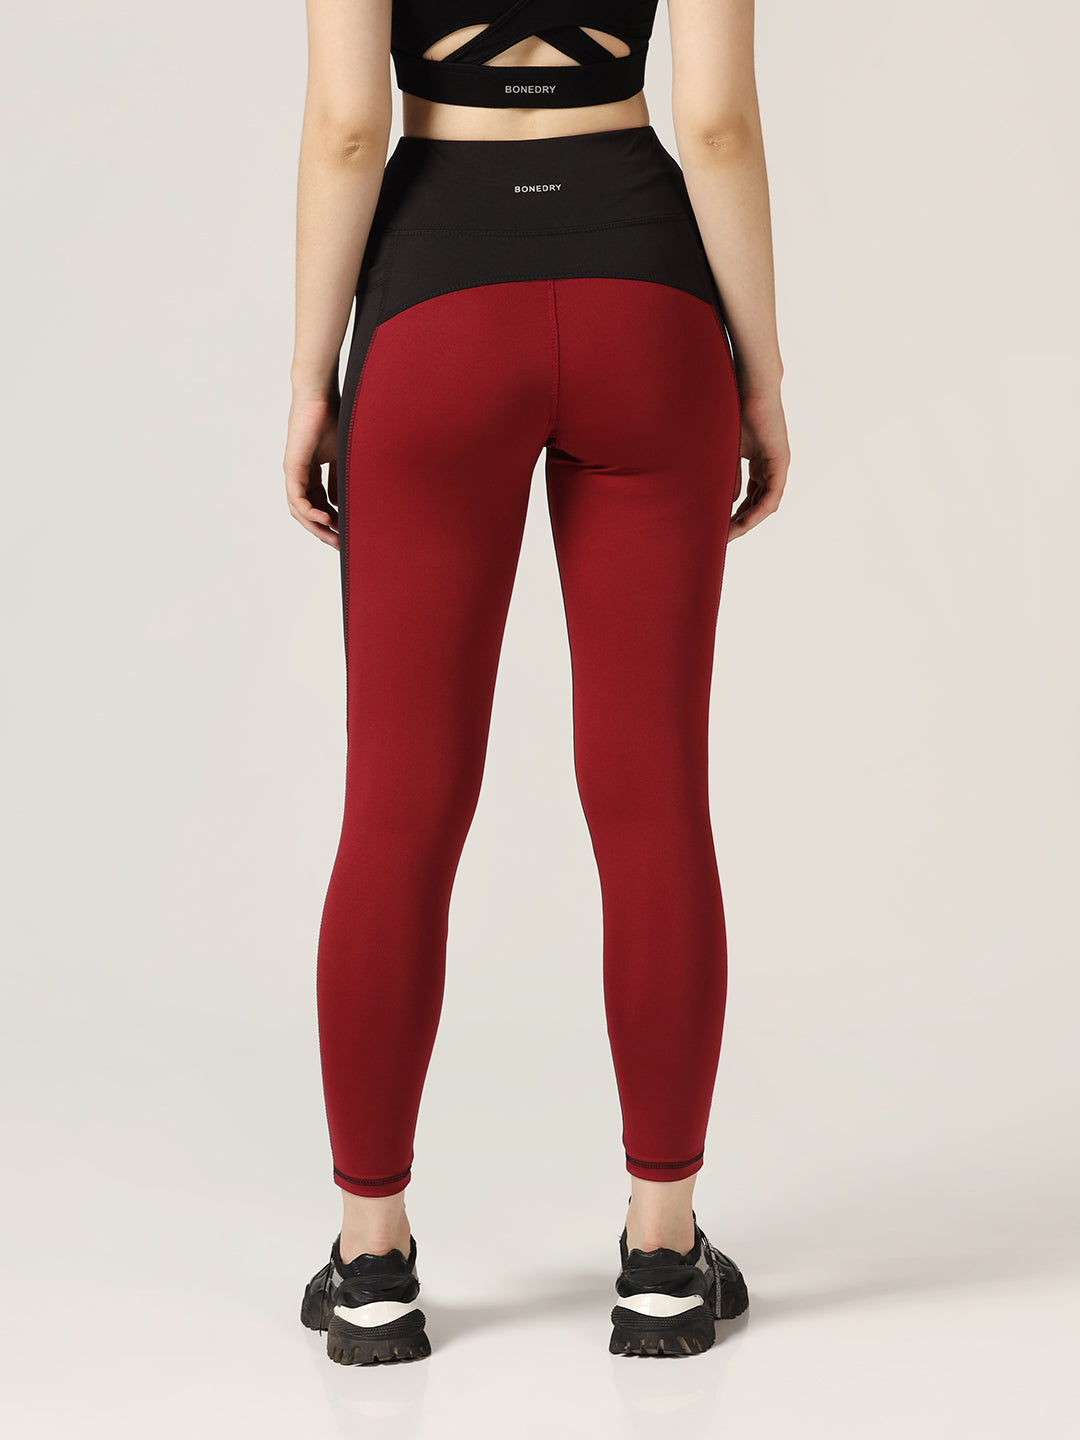 High Waist Tight With Back Hip Support - Maroon Black